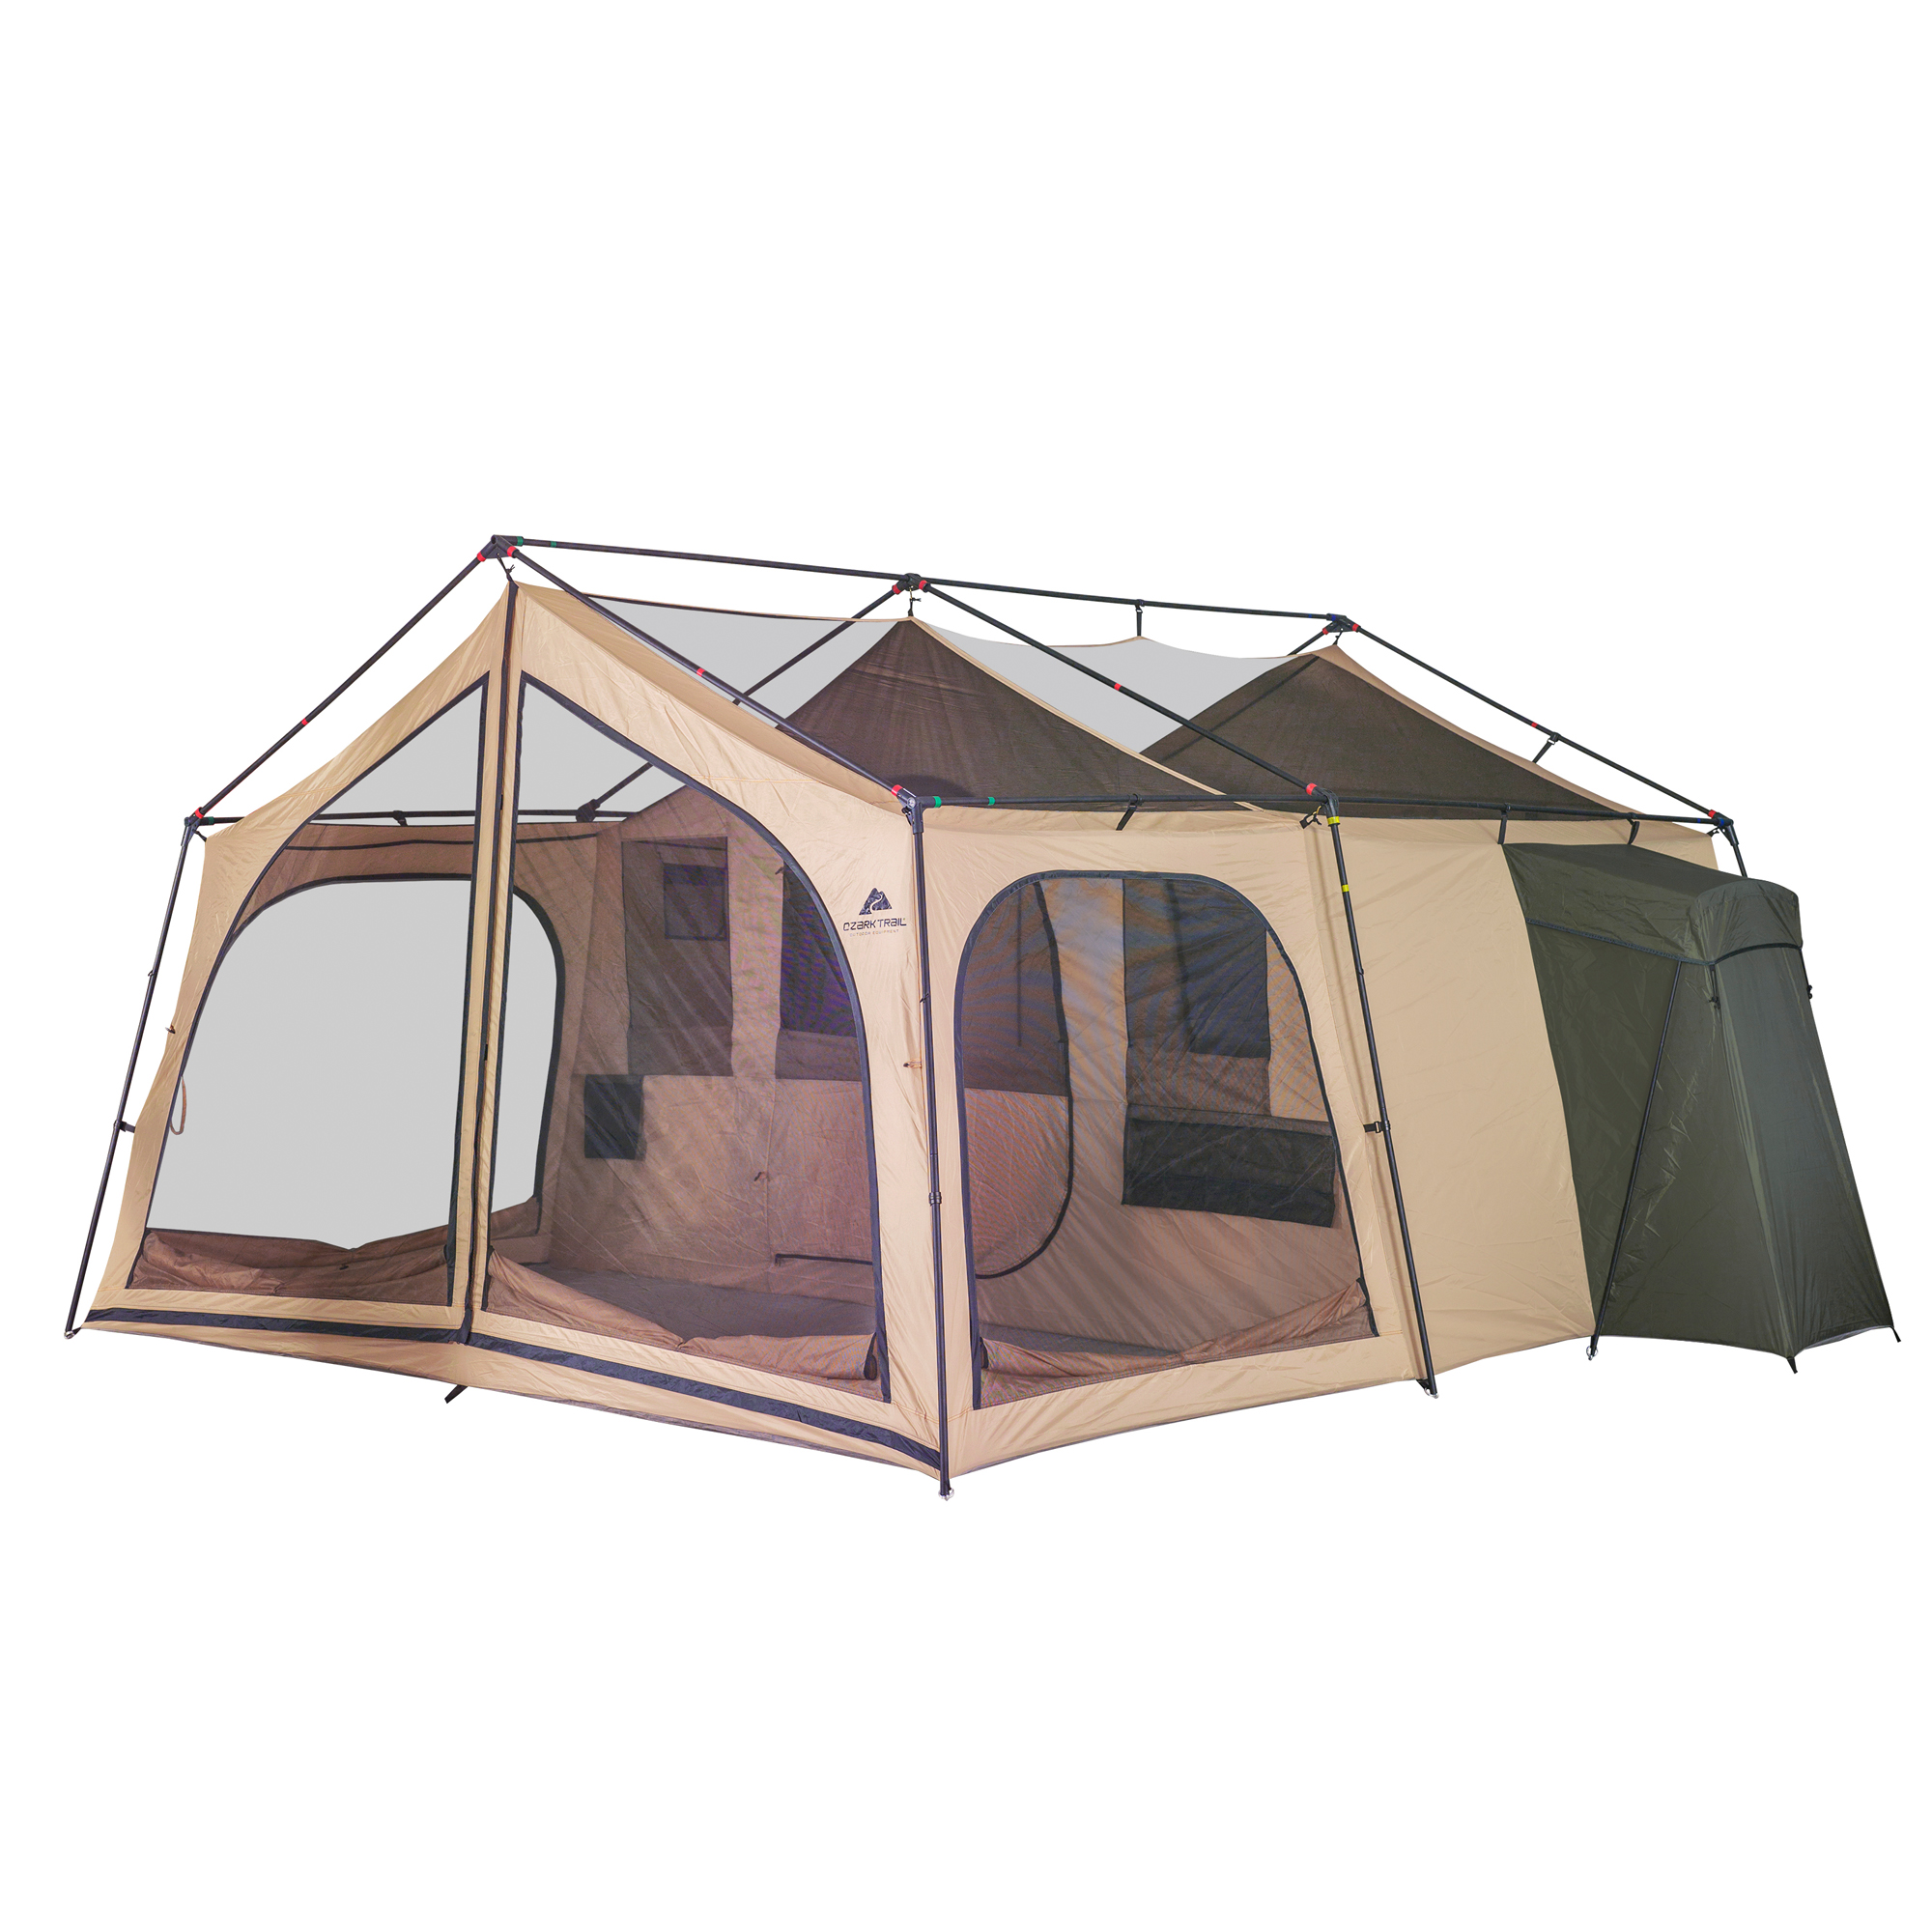 Ozark Trail 14-Person Cabin Tent for Camping - image 2 of 10